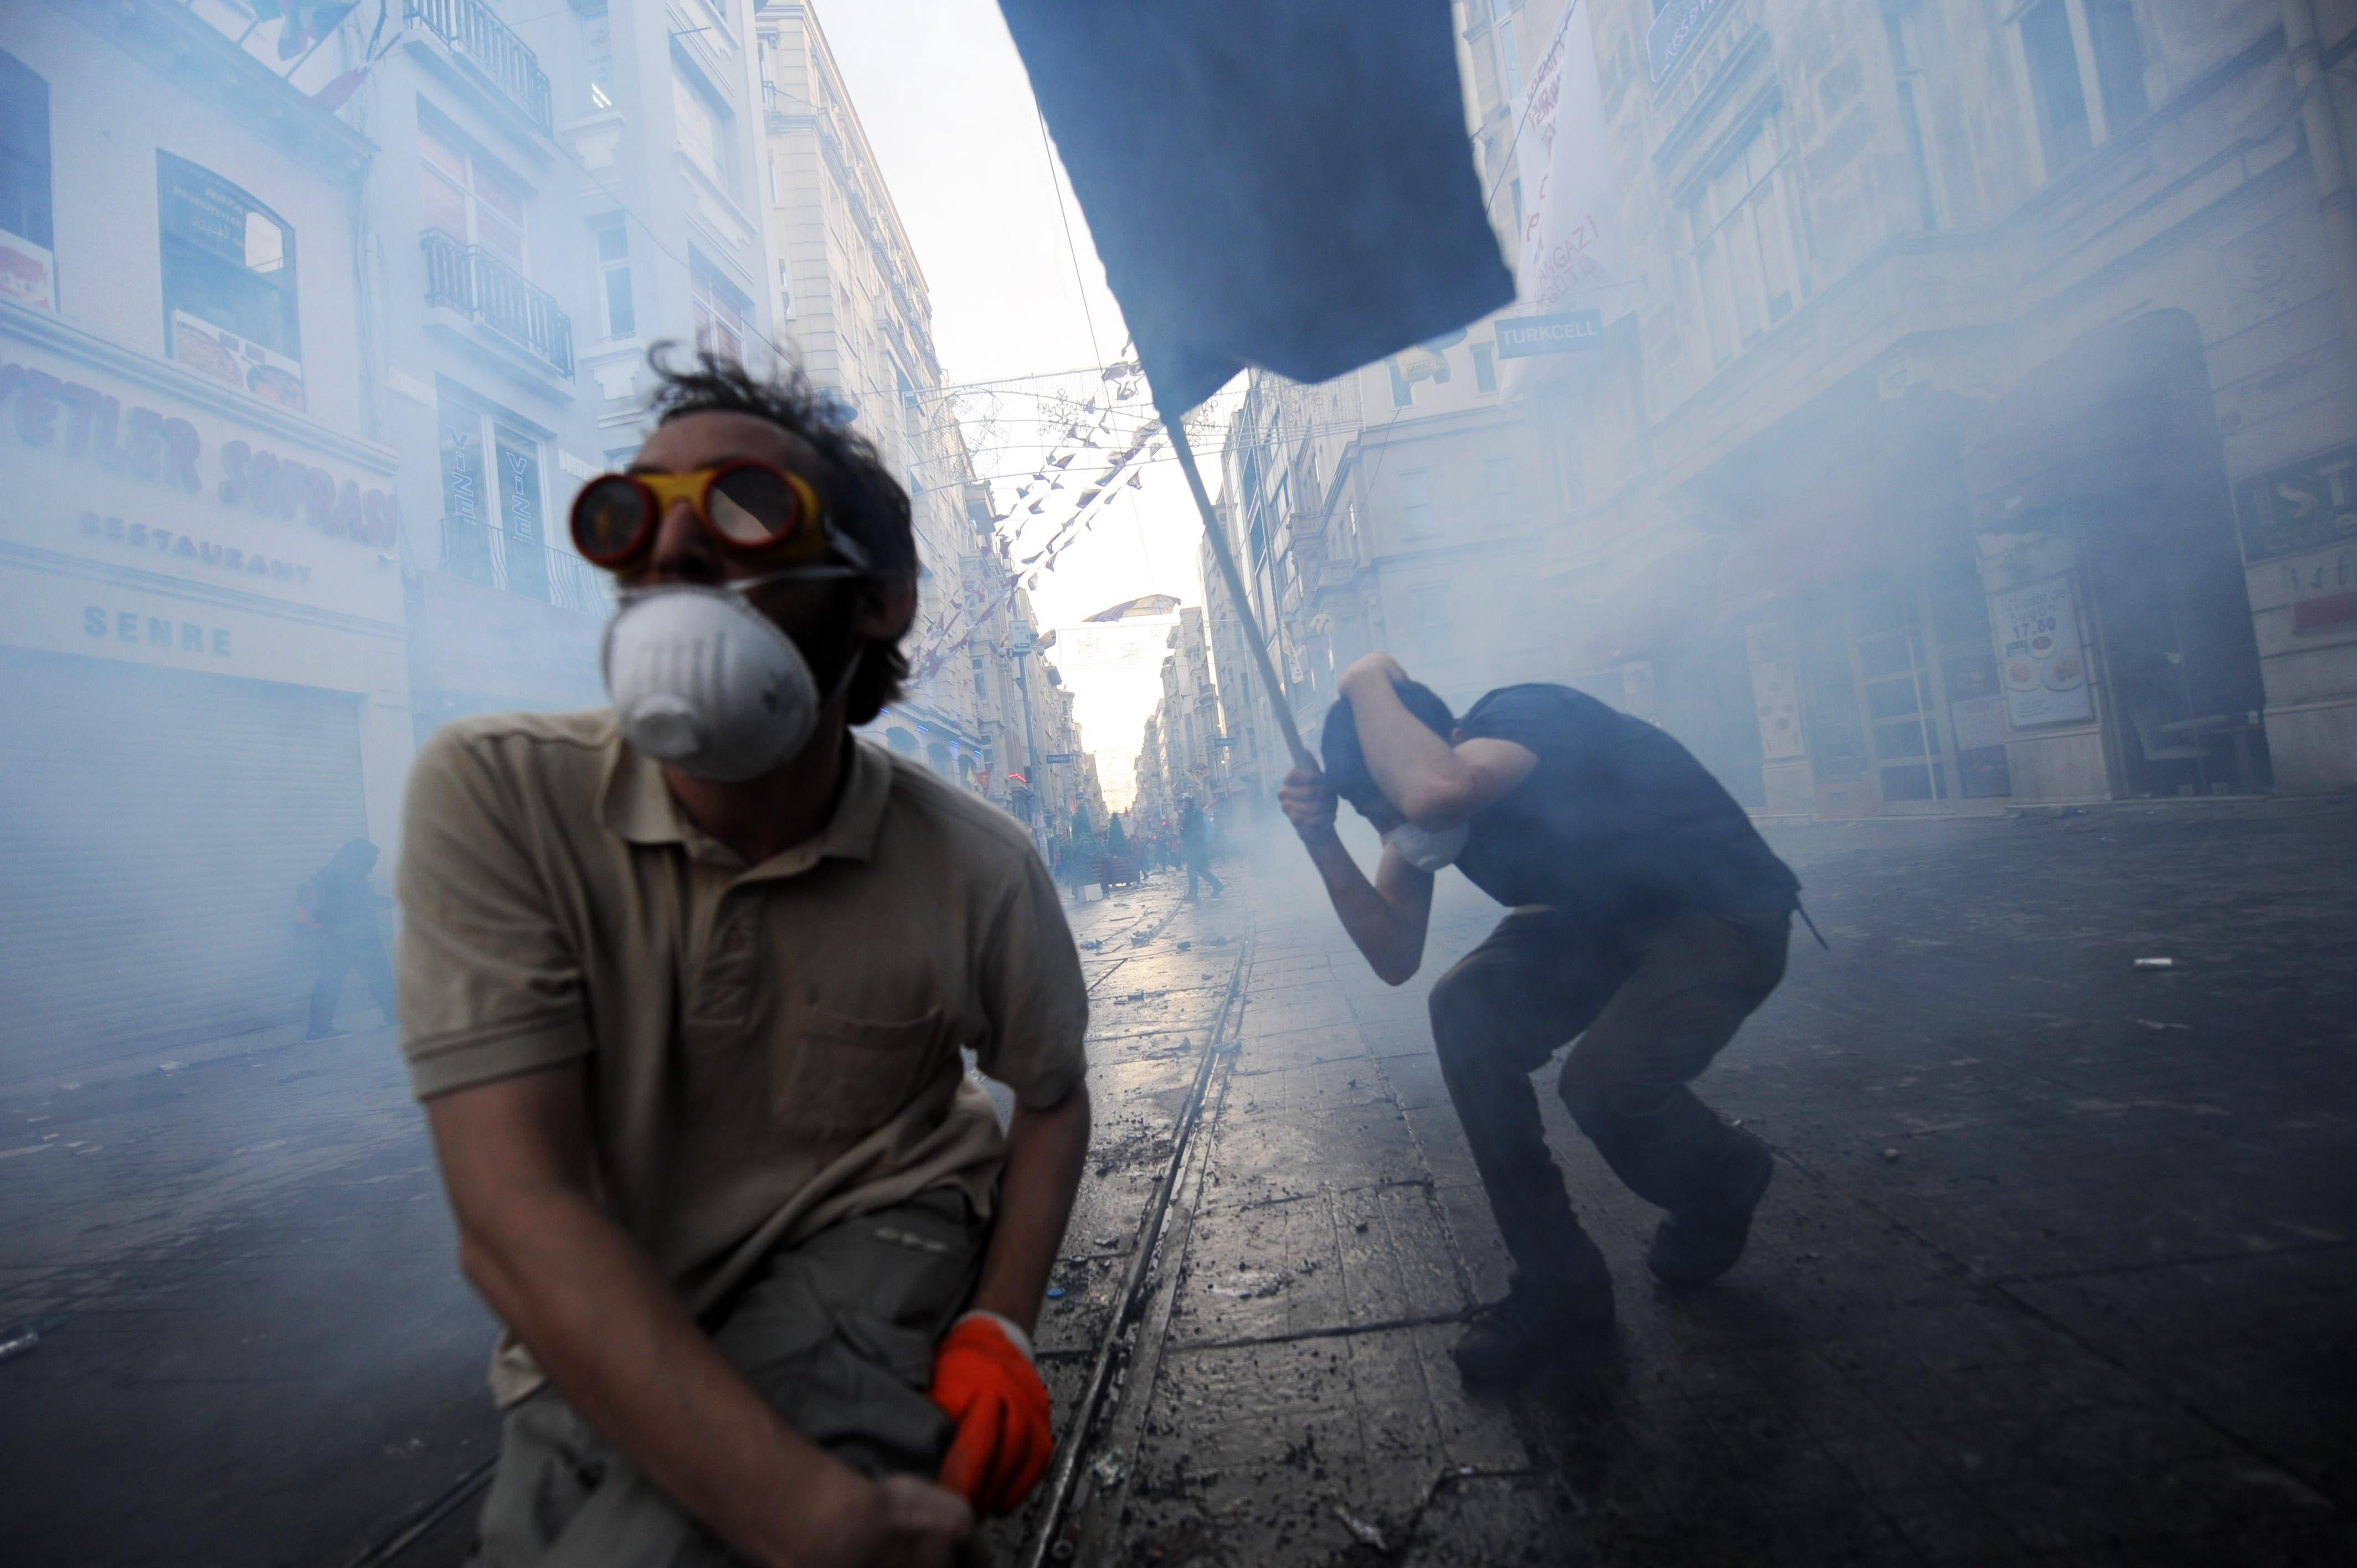 Protestors clash with Turkish riot policemen during a protest against the demolition of Taksim Gezi Park on May 31, 2013, in Taksim quarter of Istanbul.